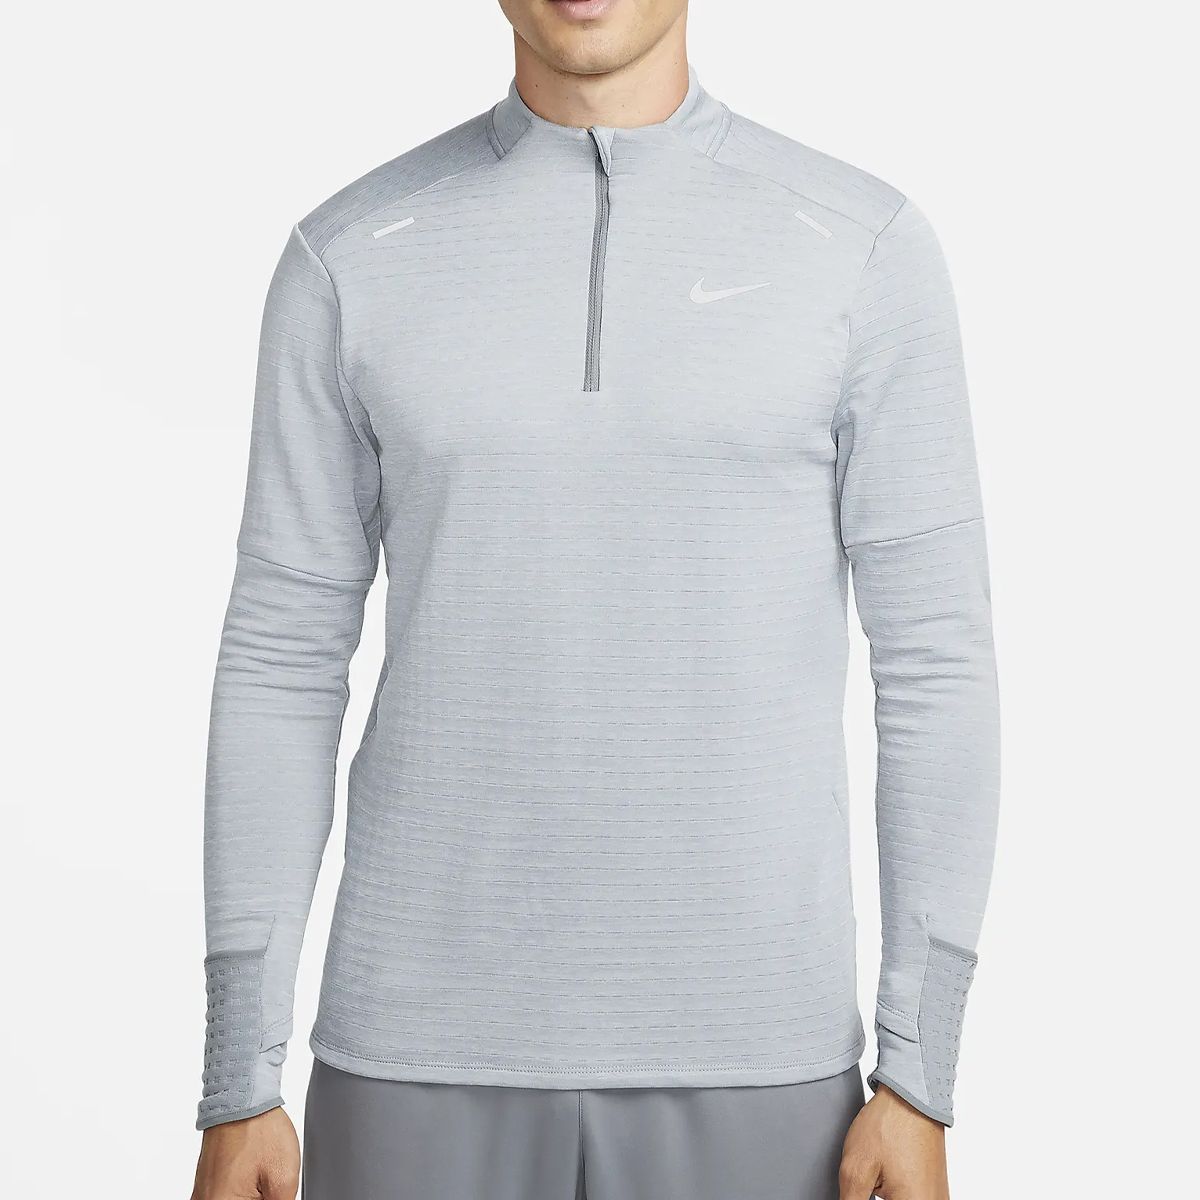 13 Best Thermal Shirts for Men 2023 - Thermal Waffle Knit Tees